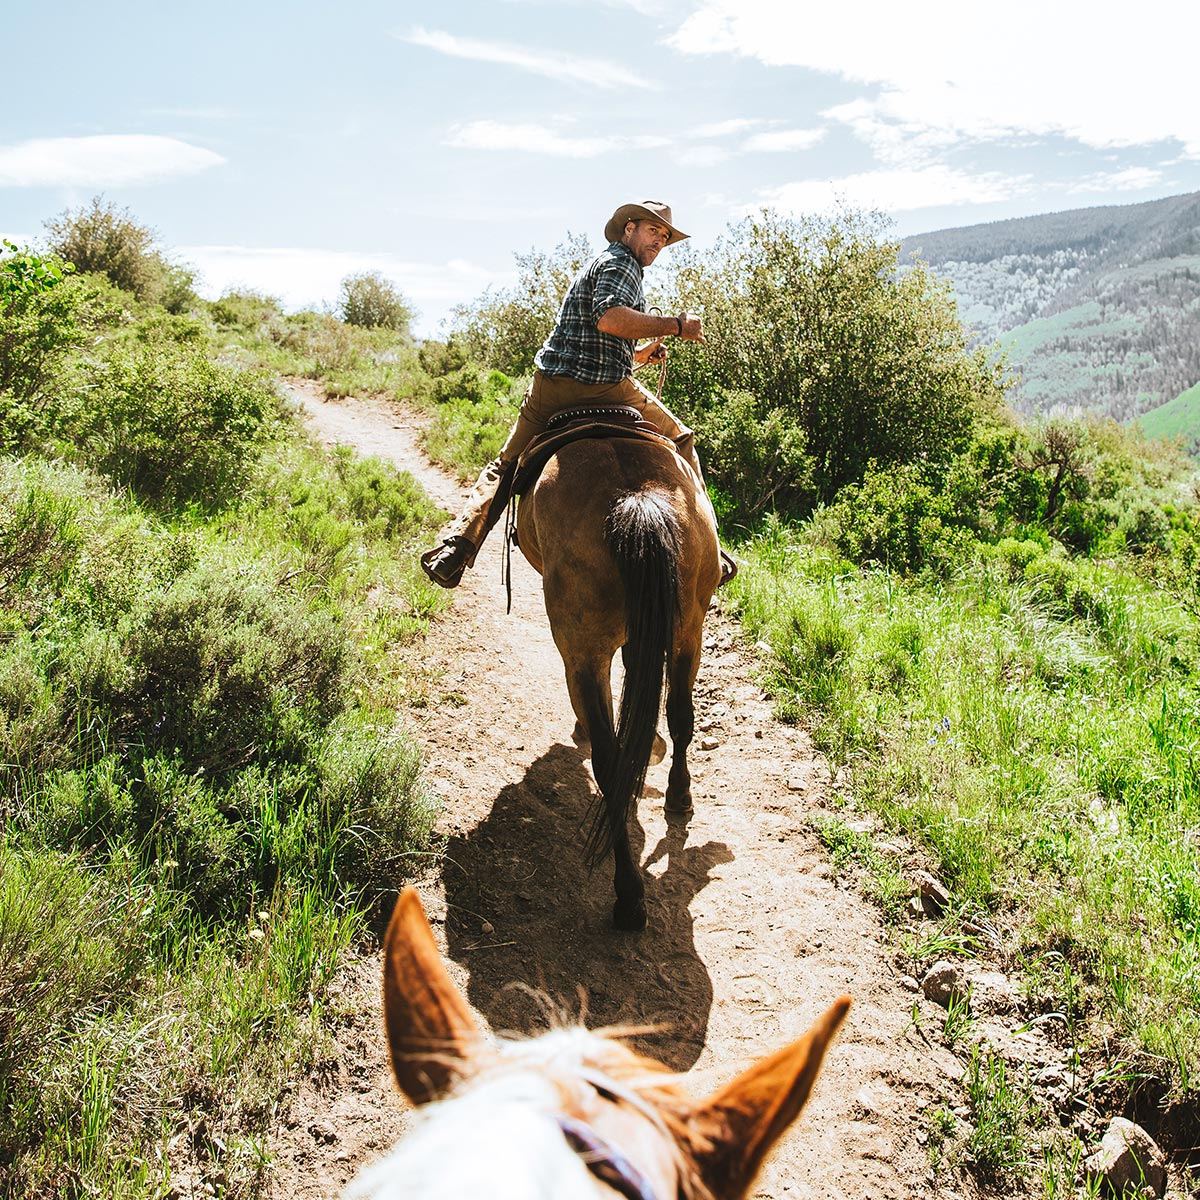 A person on a horse looks behind them at another horse riding the trail in Vail. The trail is surrounded by green grasses.